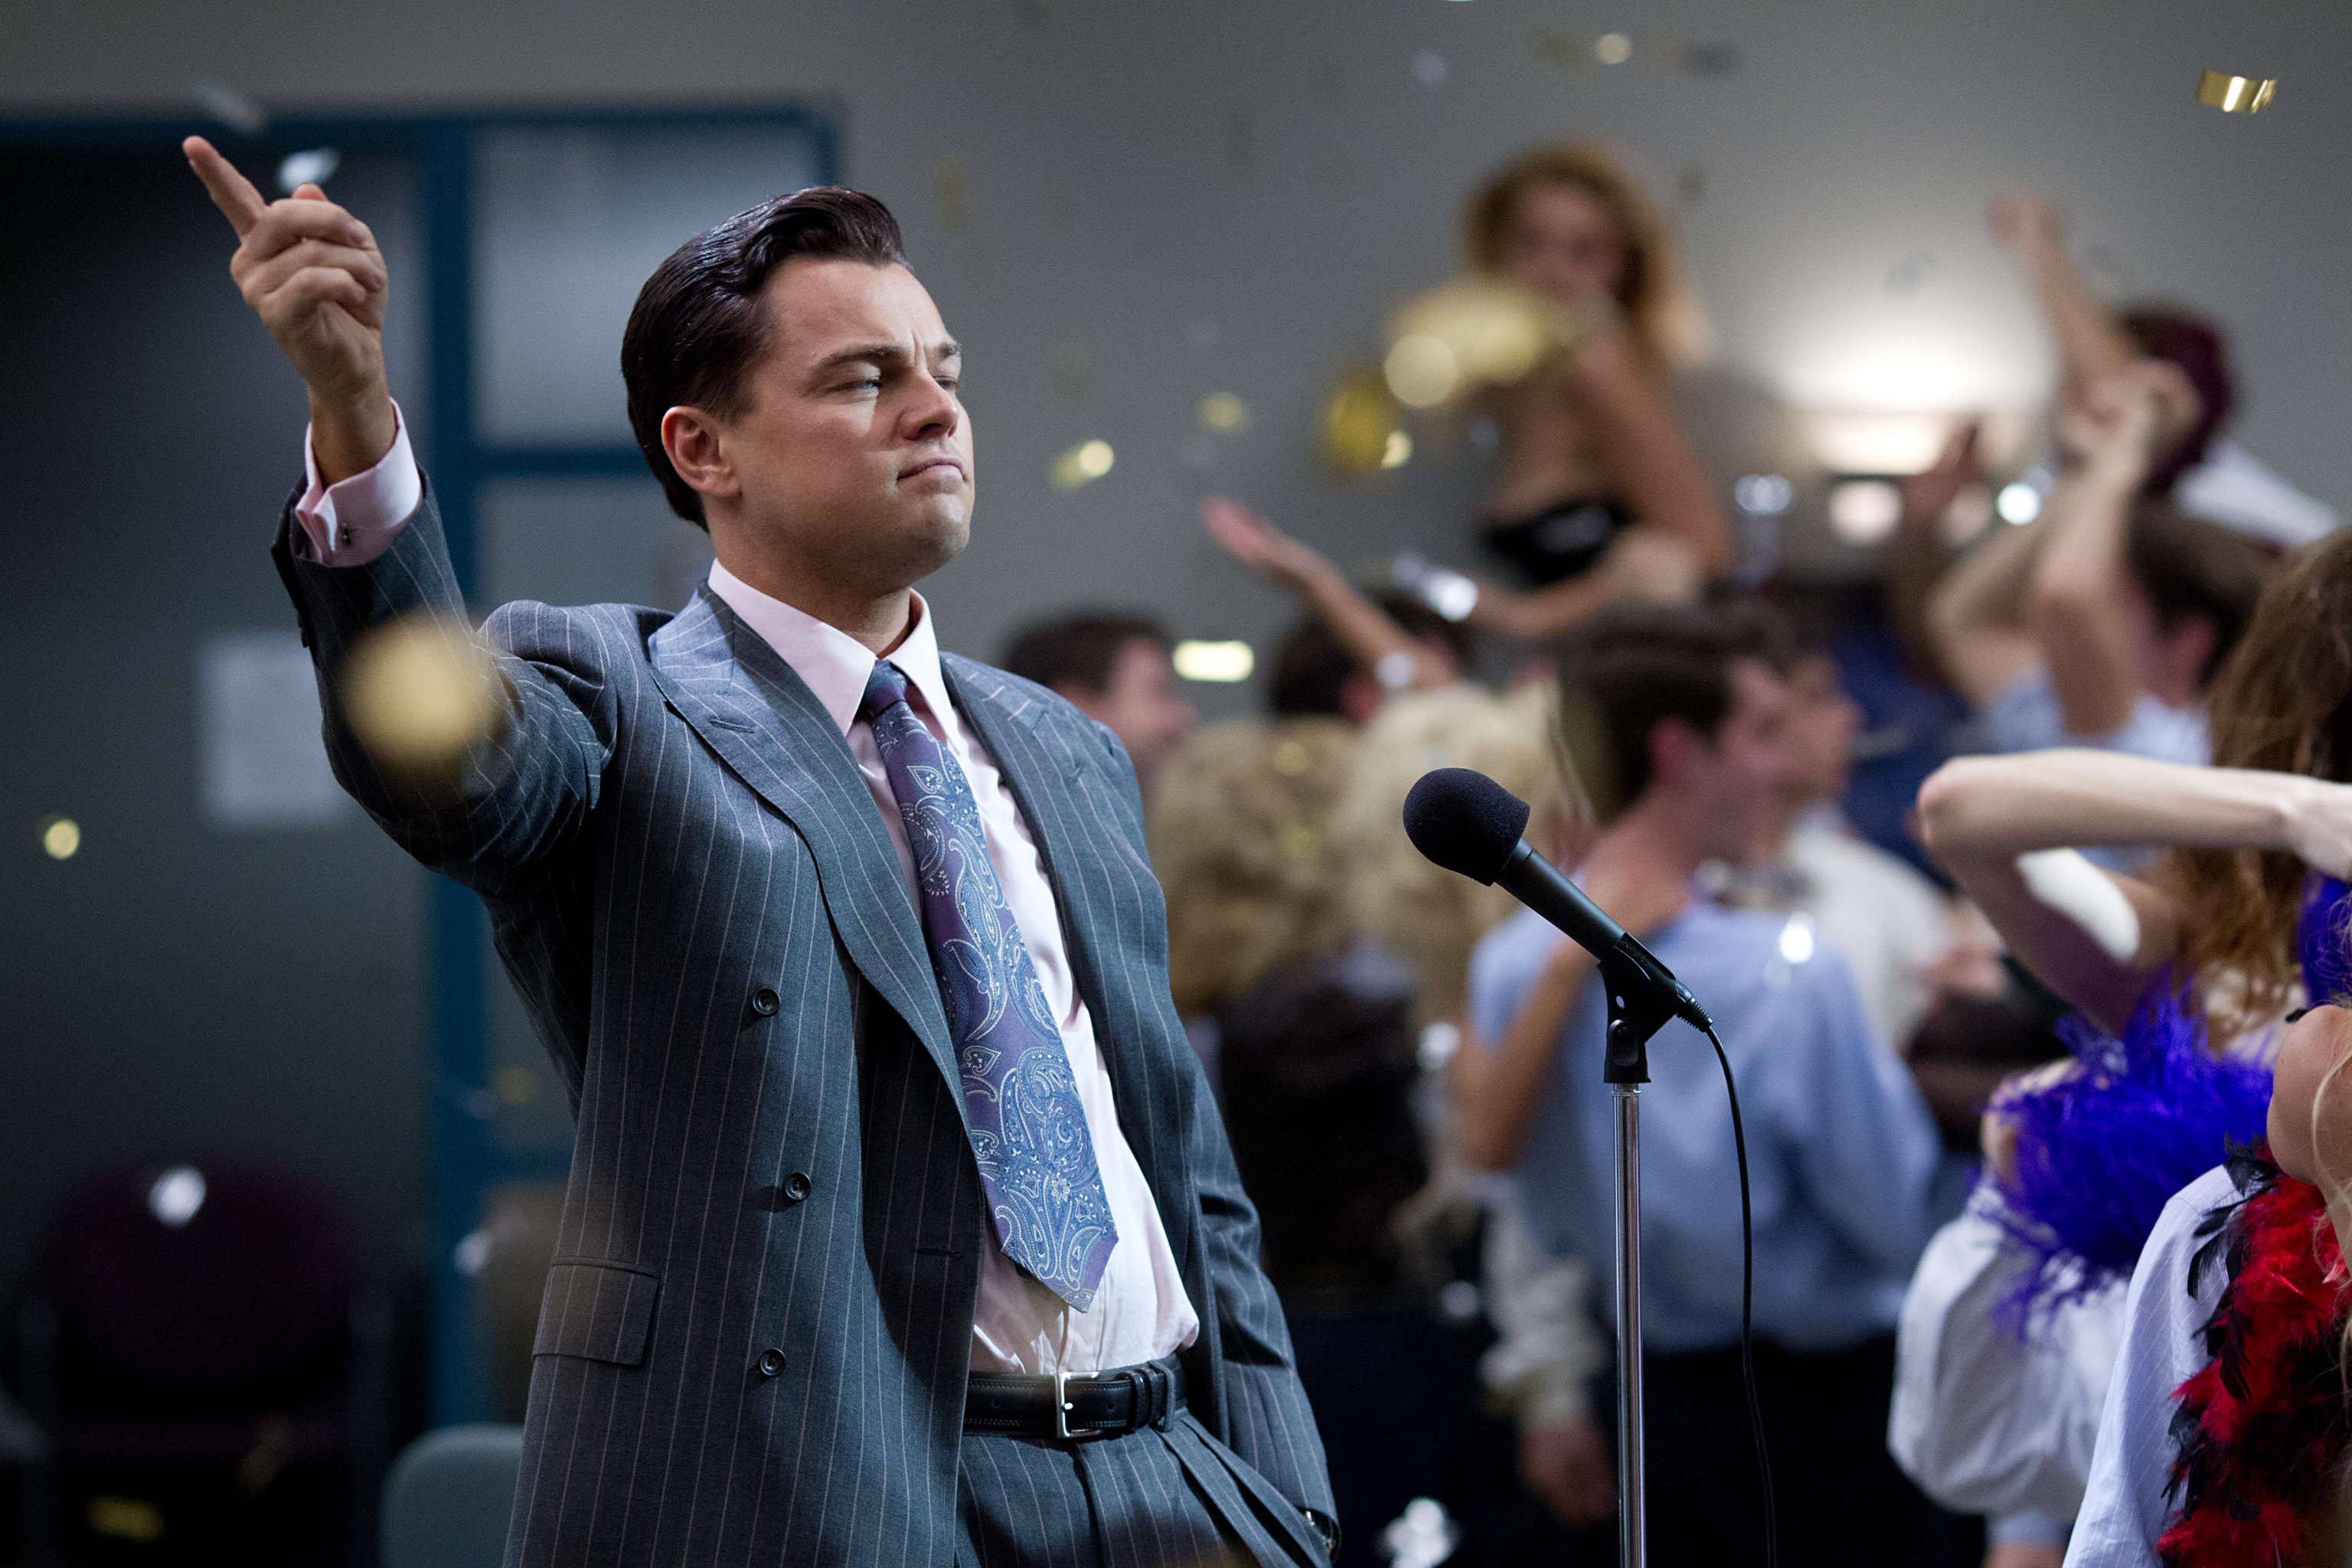 Leonardo DiCaprio is Jordan Belfort in The Wolf of Wall Street. (Mary Cybulski—Paramount Pictures)